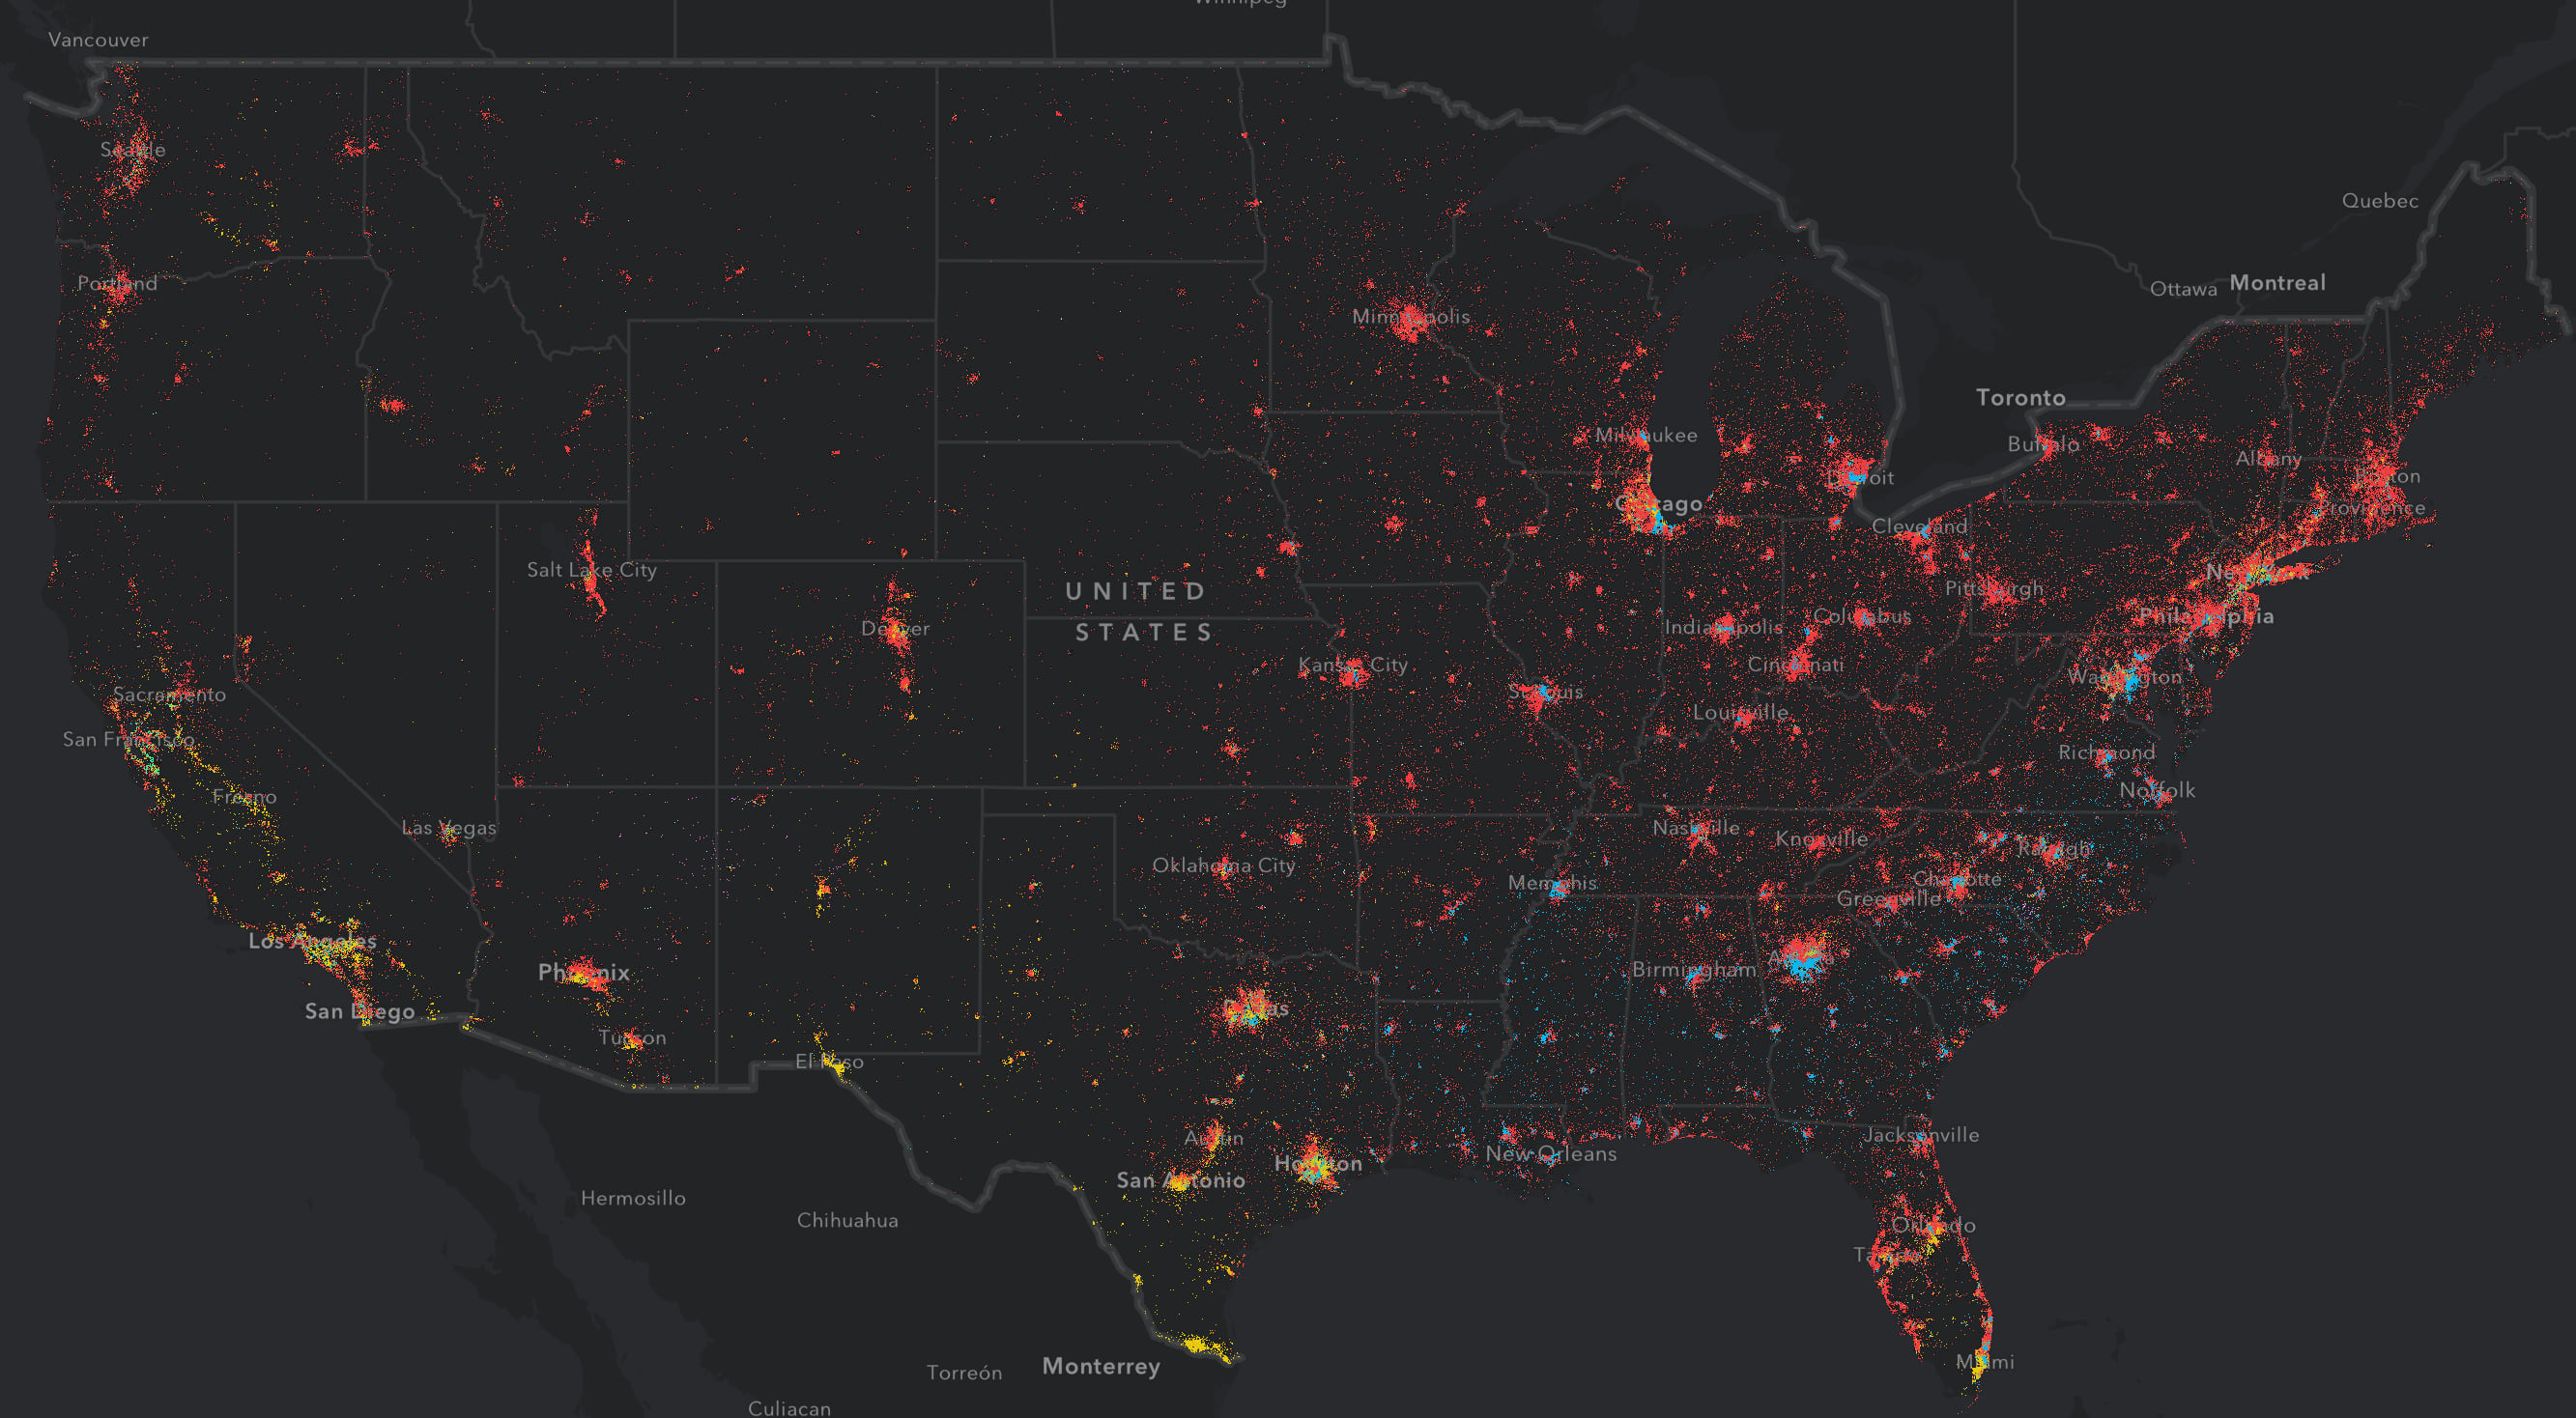 One dot represents 6400 people at a state scale.